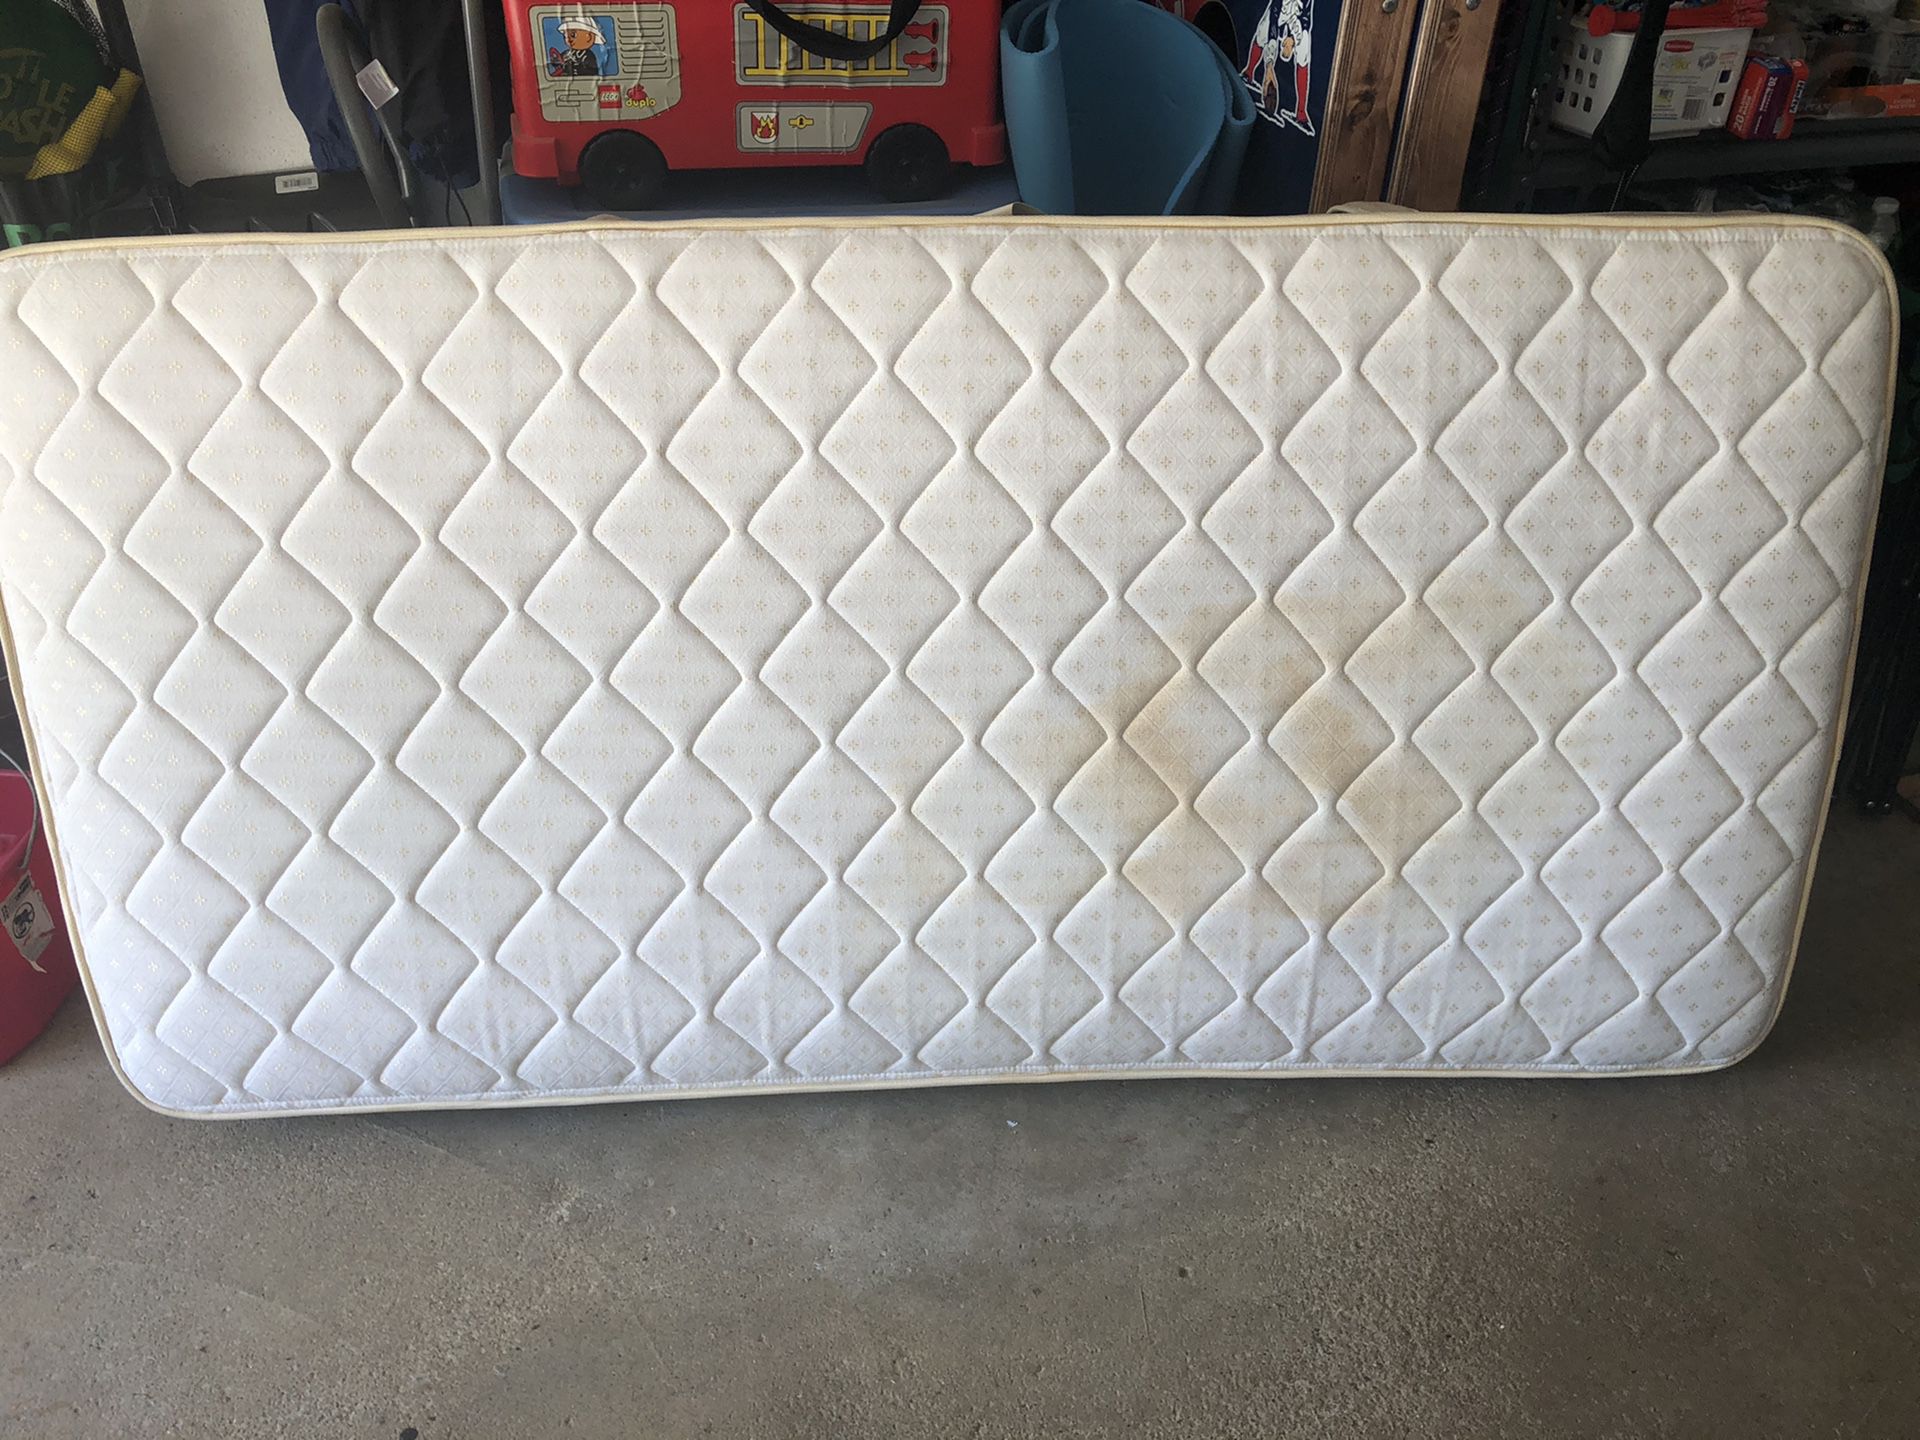 Twin mattress solid condition a few water stains